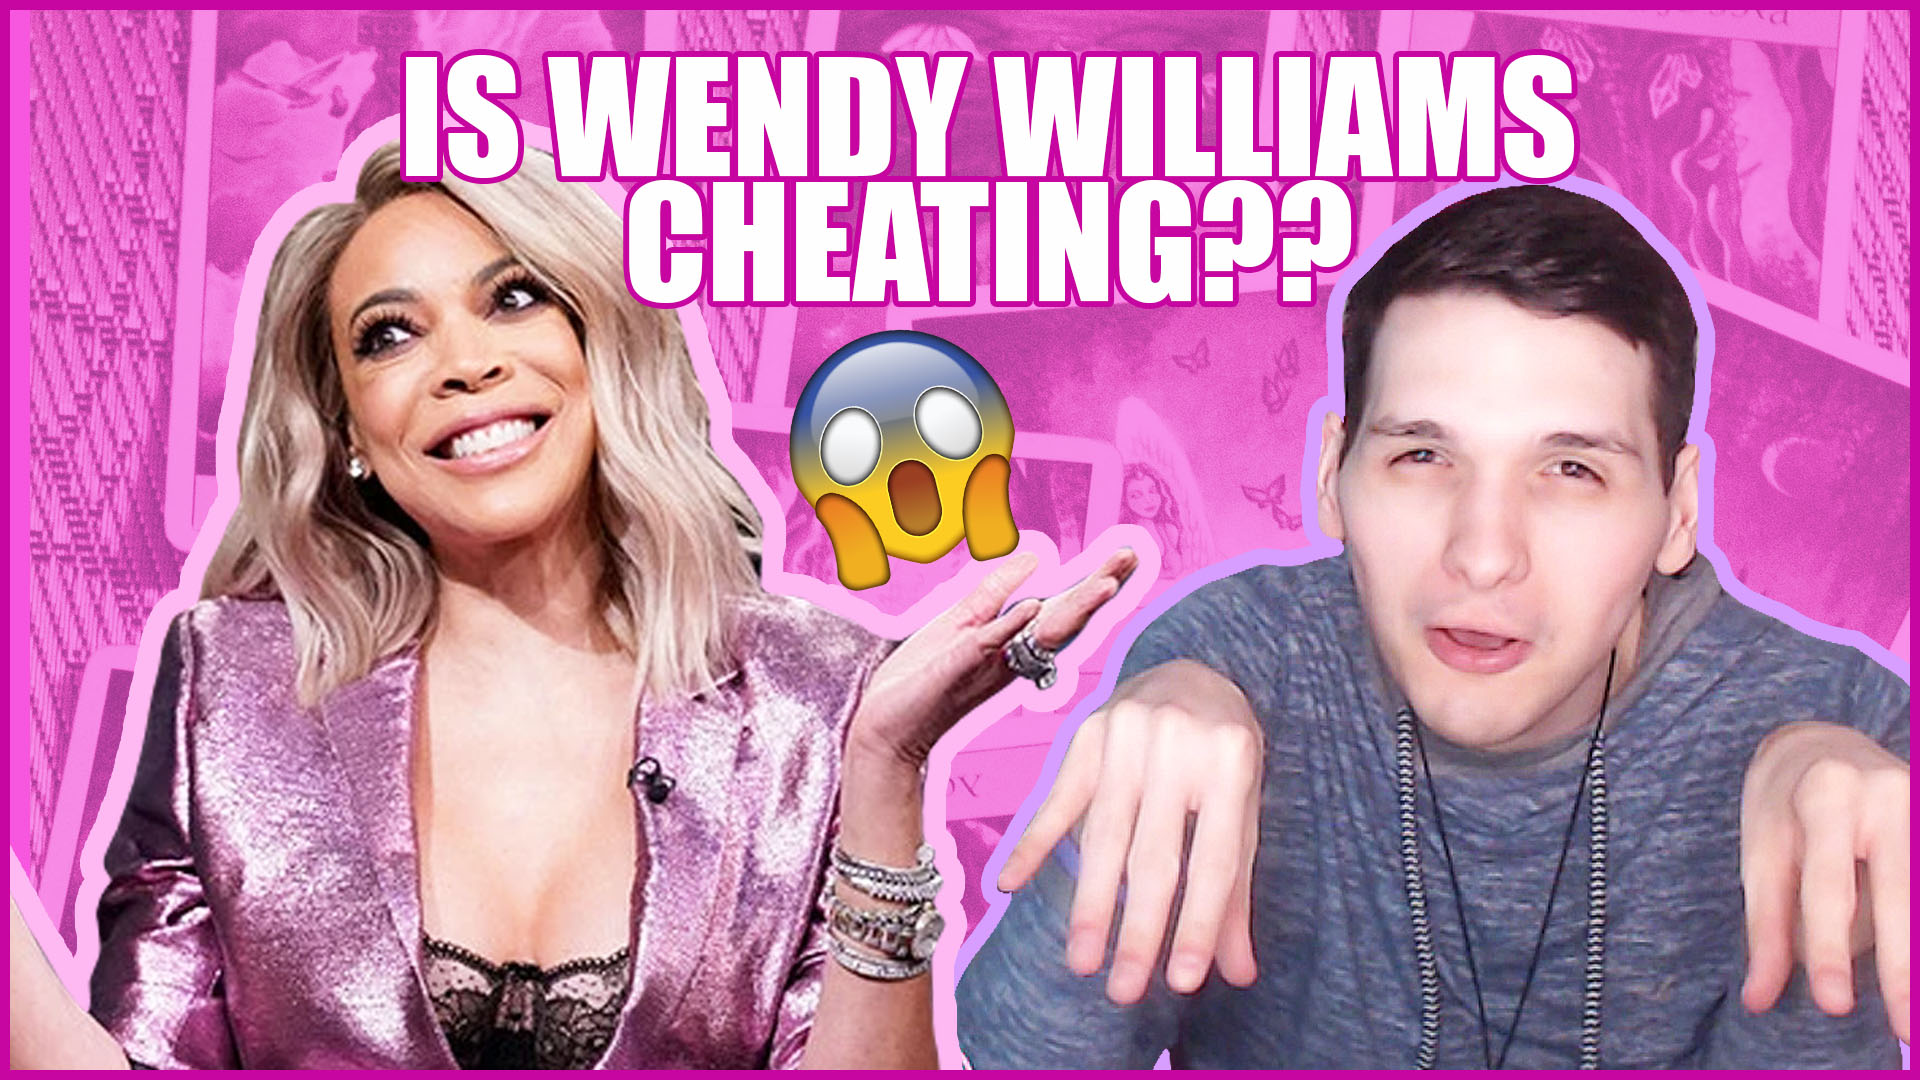 Wendy Williams Cheating